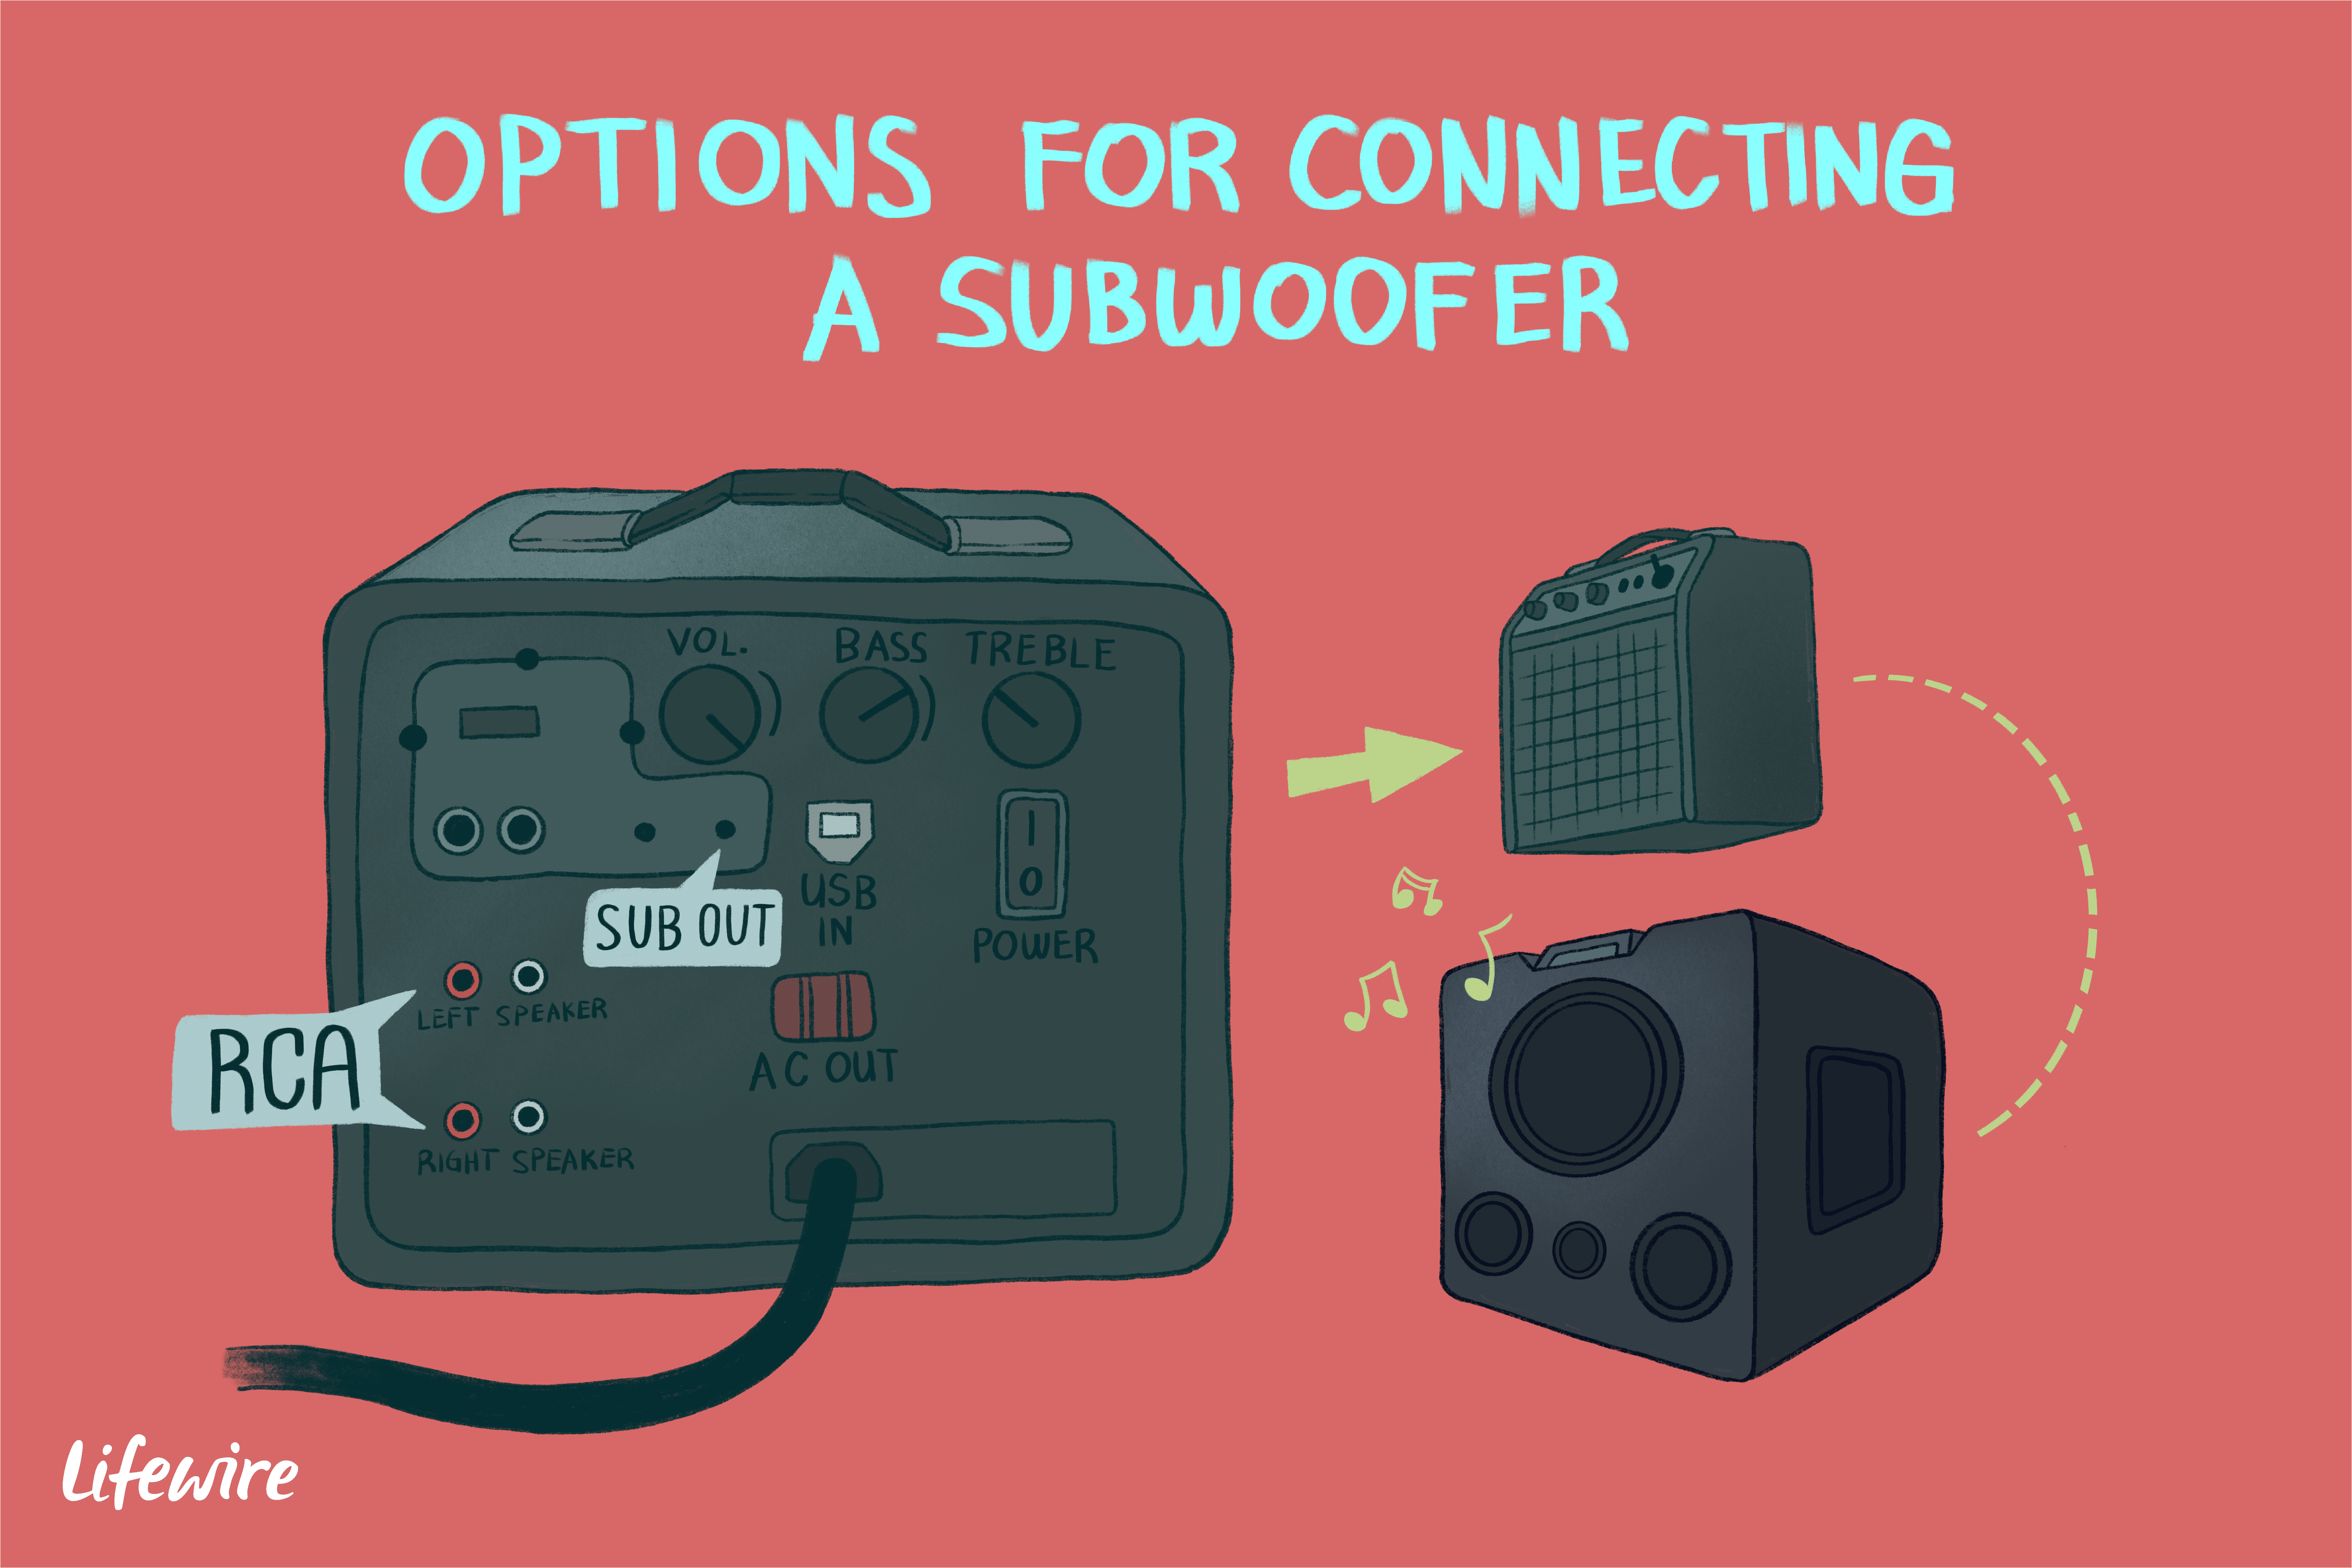 an illustration of the options for connecting a subwoofer